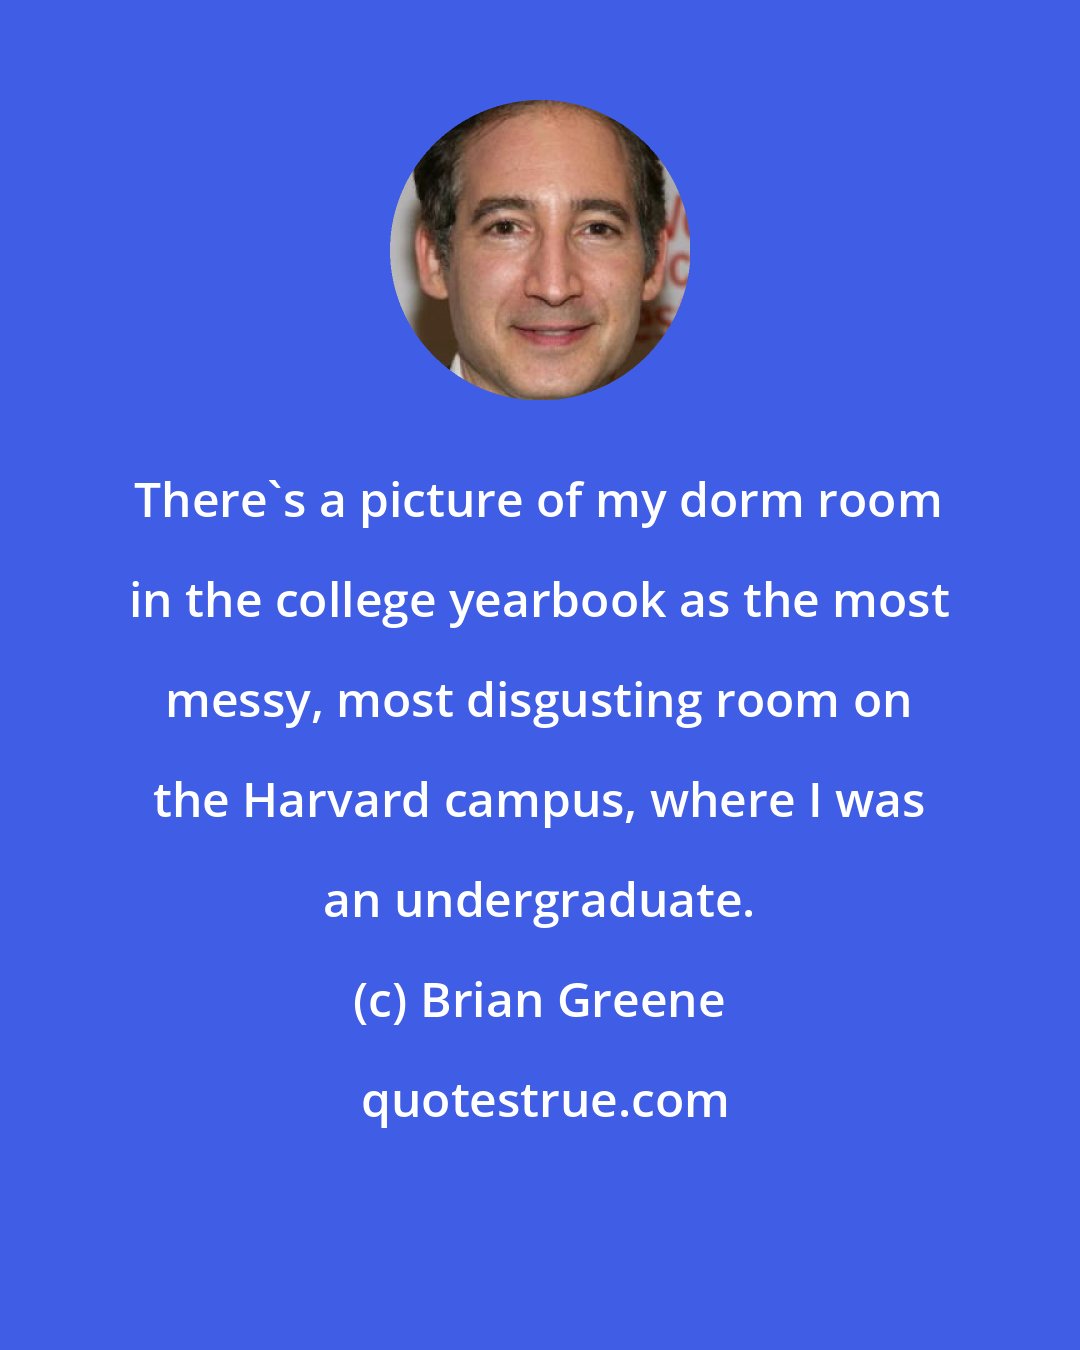 Brian Greene: There's a picture of my dorm room in the college yearbook as the most messy, most disgusting room on the Harvard campus, where I was an undergraduate.